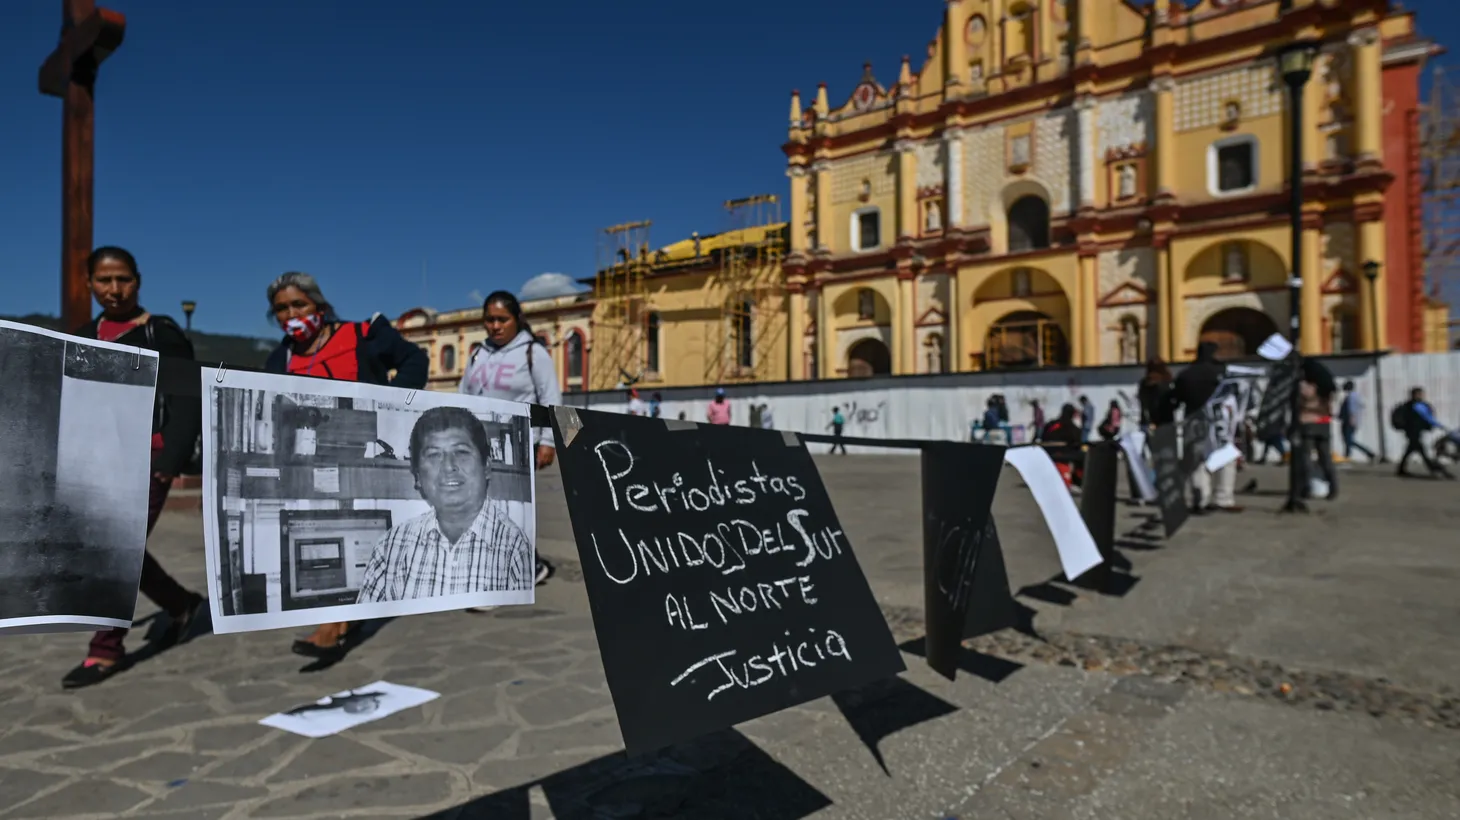 Photos of murdered journalists are displayed in front of the Cathedral of San Cristóbal de las Casas, during a nationwide protest against violence against journalists in Mexico. Journalist Lourdes Maldonado Lopez was shot dead on January 24, 2022 in her car outside her home in Tijuana, marking the third murder of a journalist in the country this year.